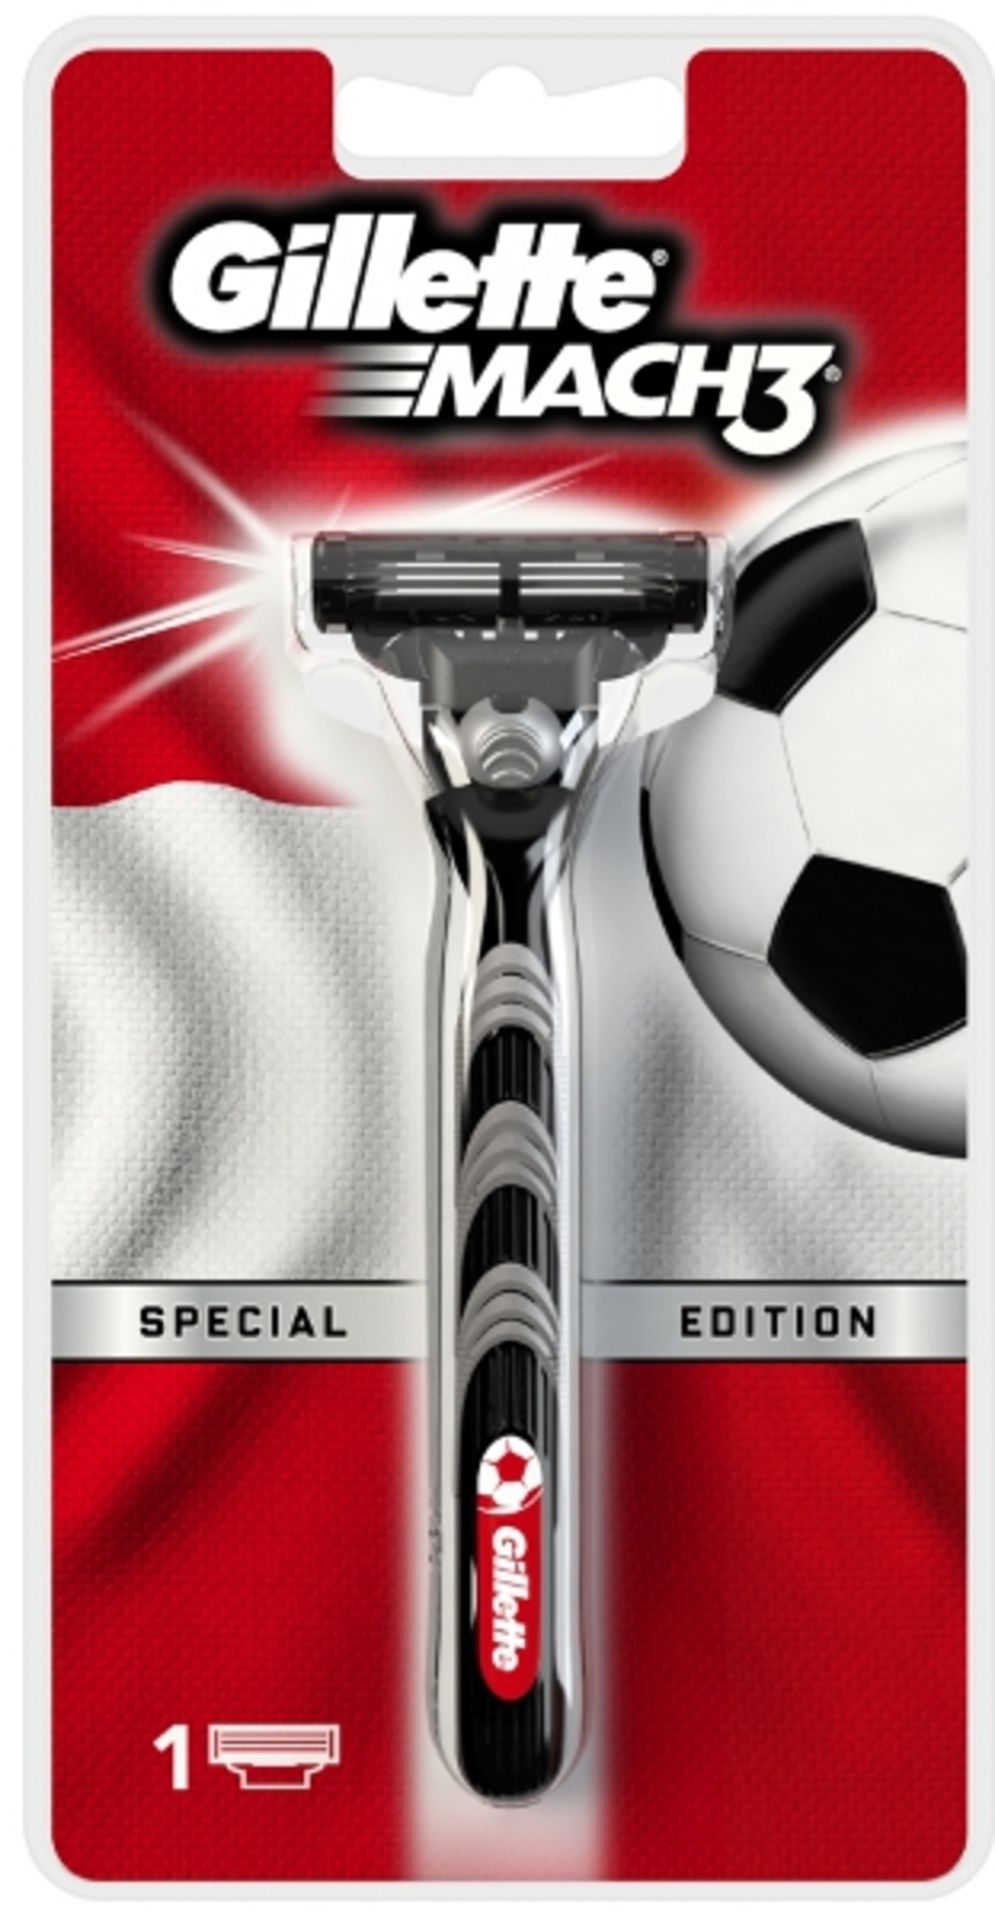 V *TRADE QTY* Brand New Gillette Mach3 Football Special Edition X 12 YOUR BID PRICE TO BE MULTIPLIED